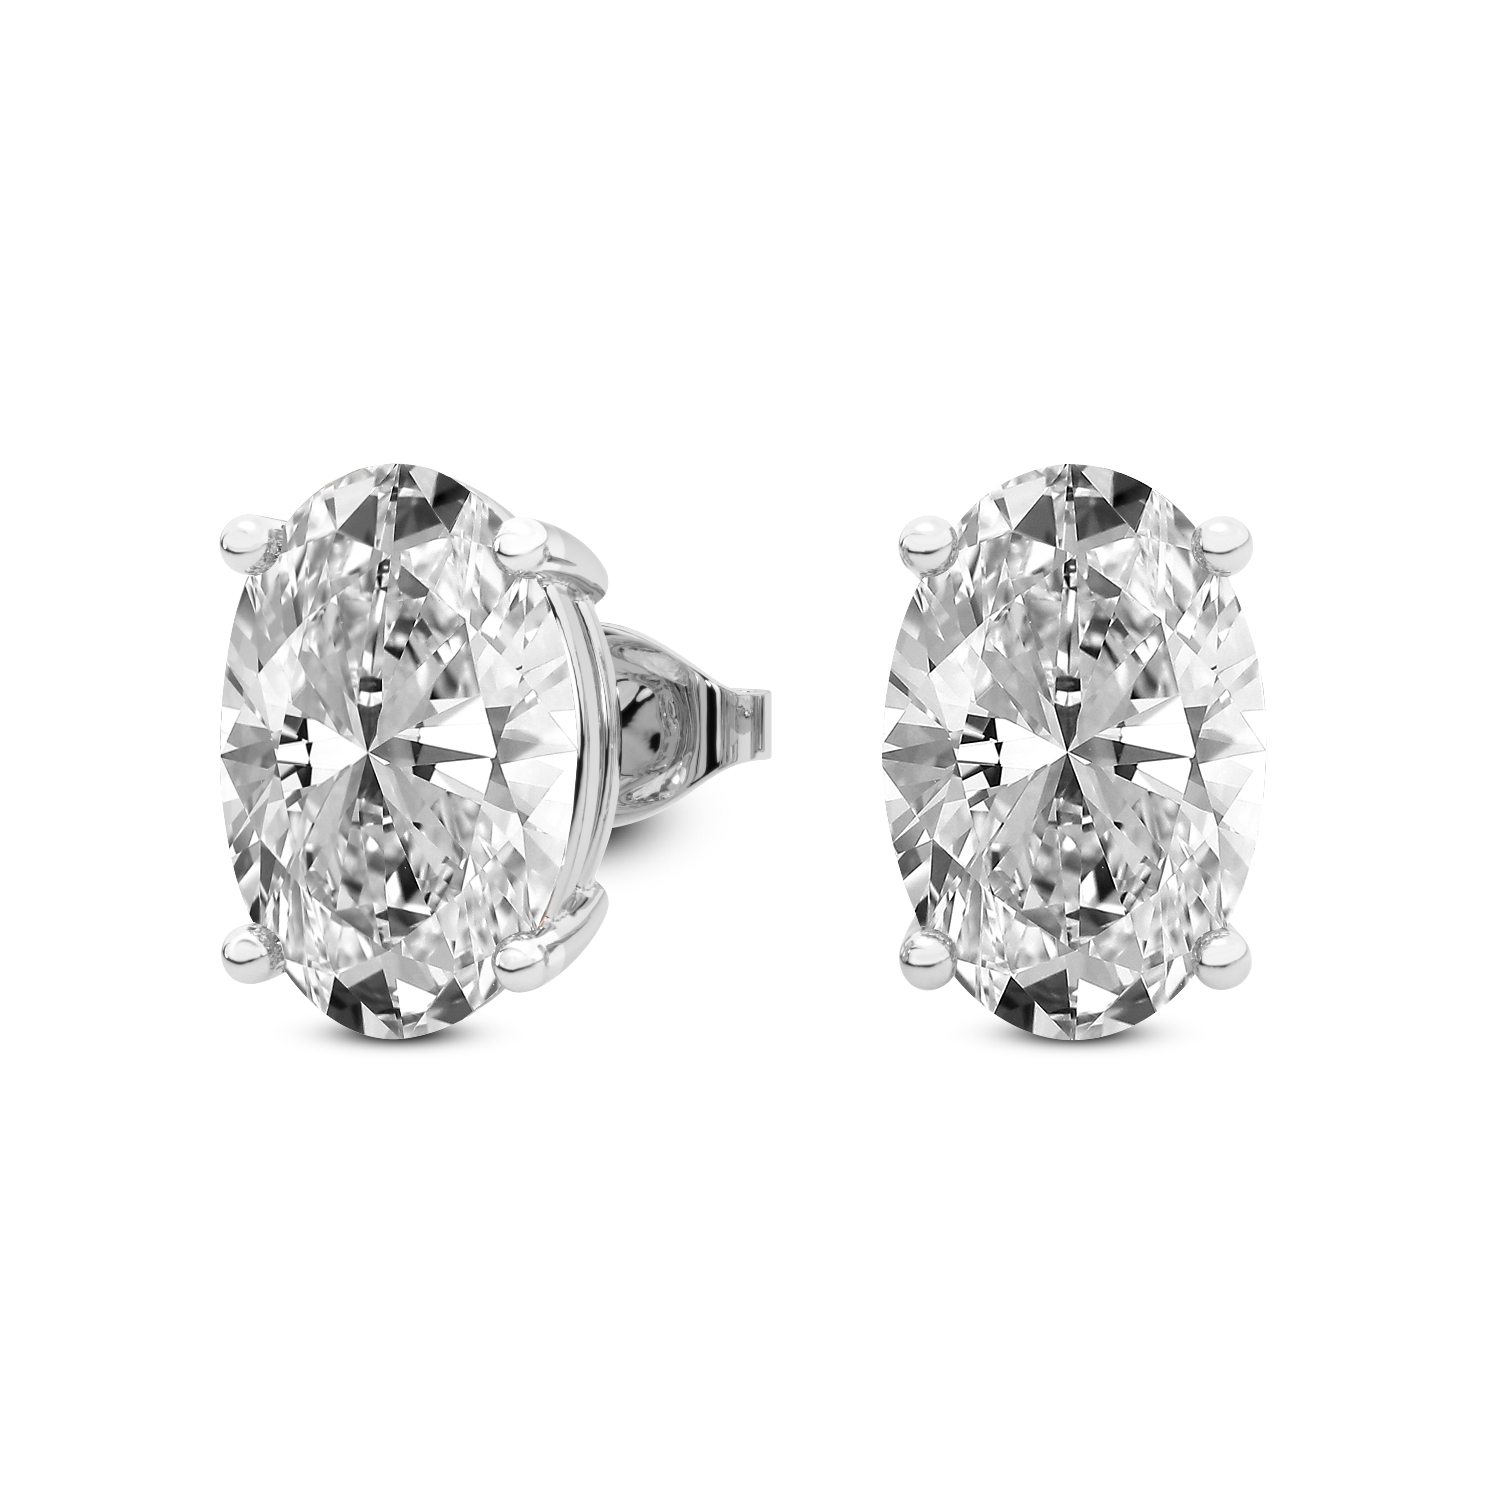 4 Prong Oval Lab Diamond Stud Earrings white gold earring, small right view